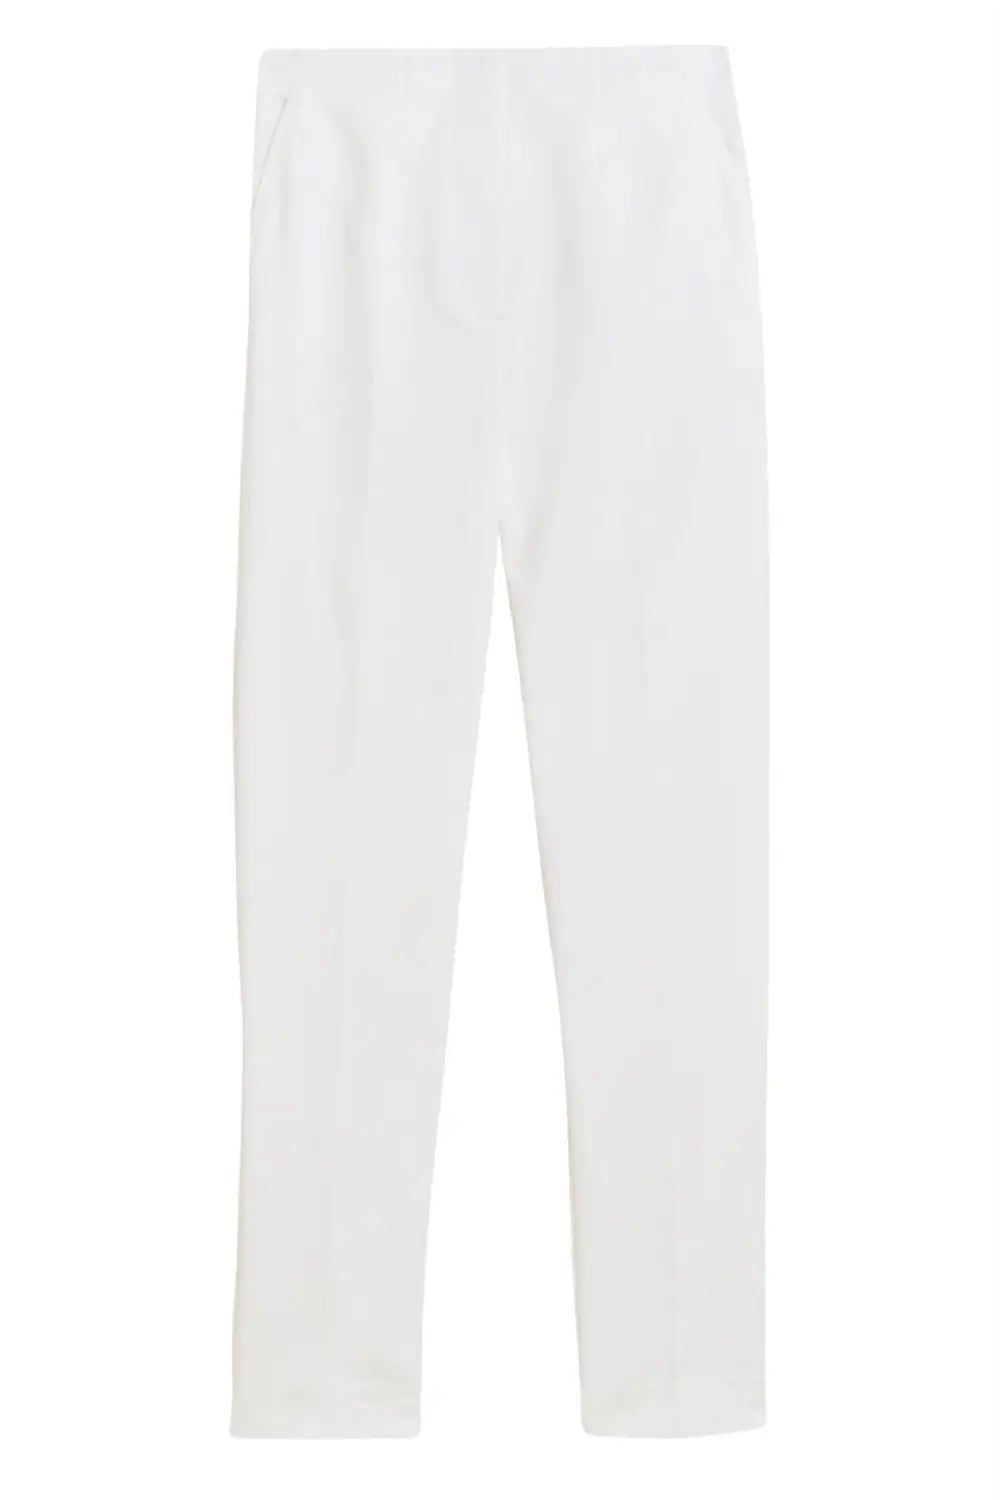 M&S Slim Fit Ankle Grazer Trousers